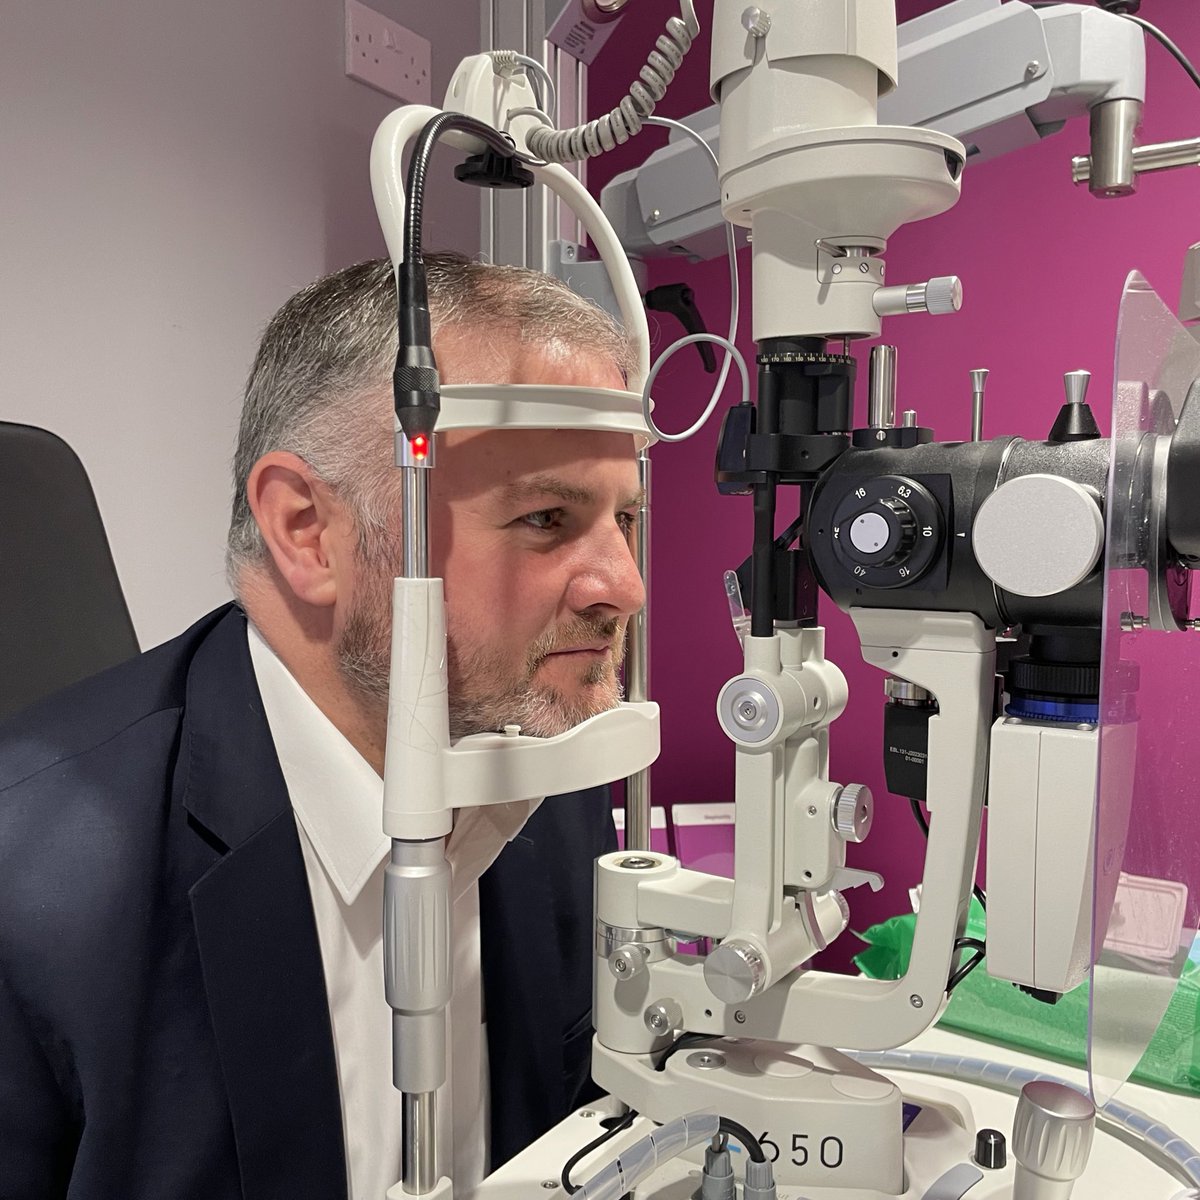 Experiencing sight loss can be devastating, and it is becoming more and more common. Regular eye tests are one of the best ways to protect eyesight – I had my eye test this morning and I encourage everyone to book.